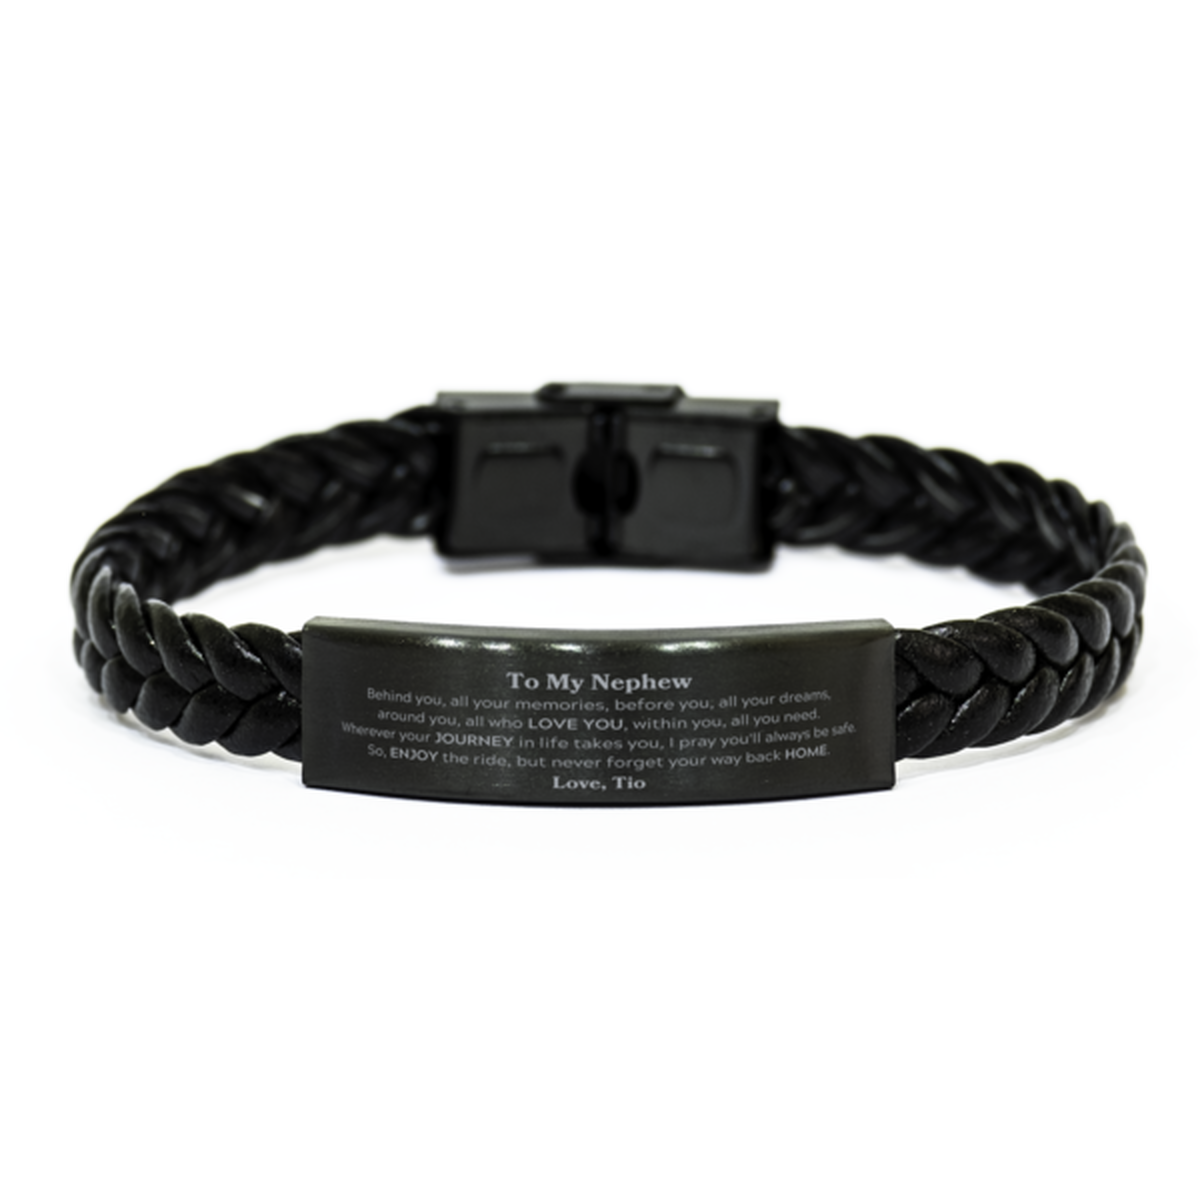 To My Nephew Graduation Gifts from Tio, Nephew Braided Leather Bracelet Christmas Birthday Gifts for Nephew Behind you, all your memories, before you, all your dreams. Love, Tio